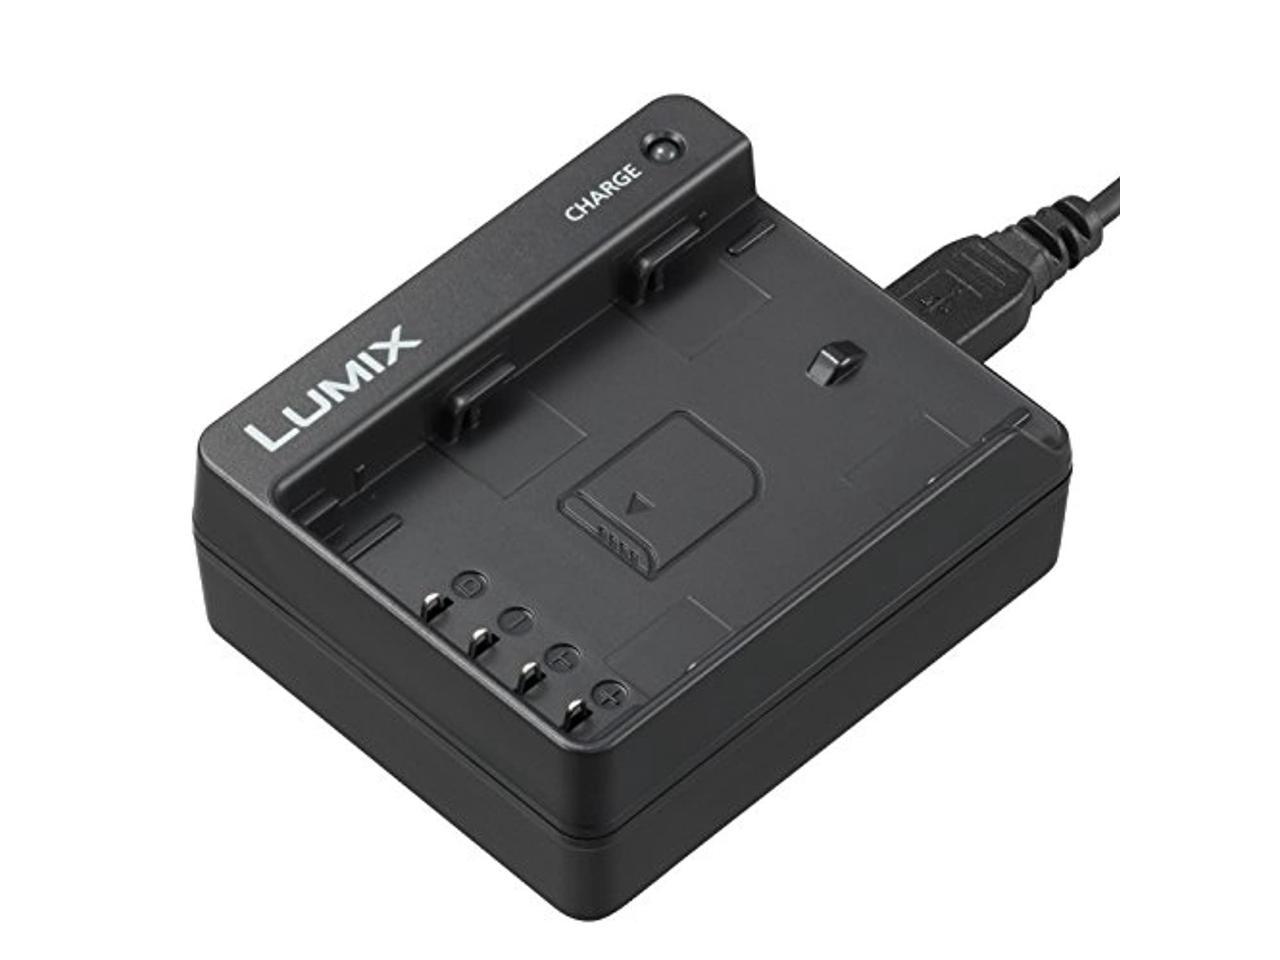 DMW BCG10E Dual LCD Battery Charger High Low Modes for Panasonic Lumix Cameras 